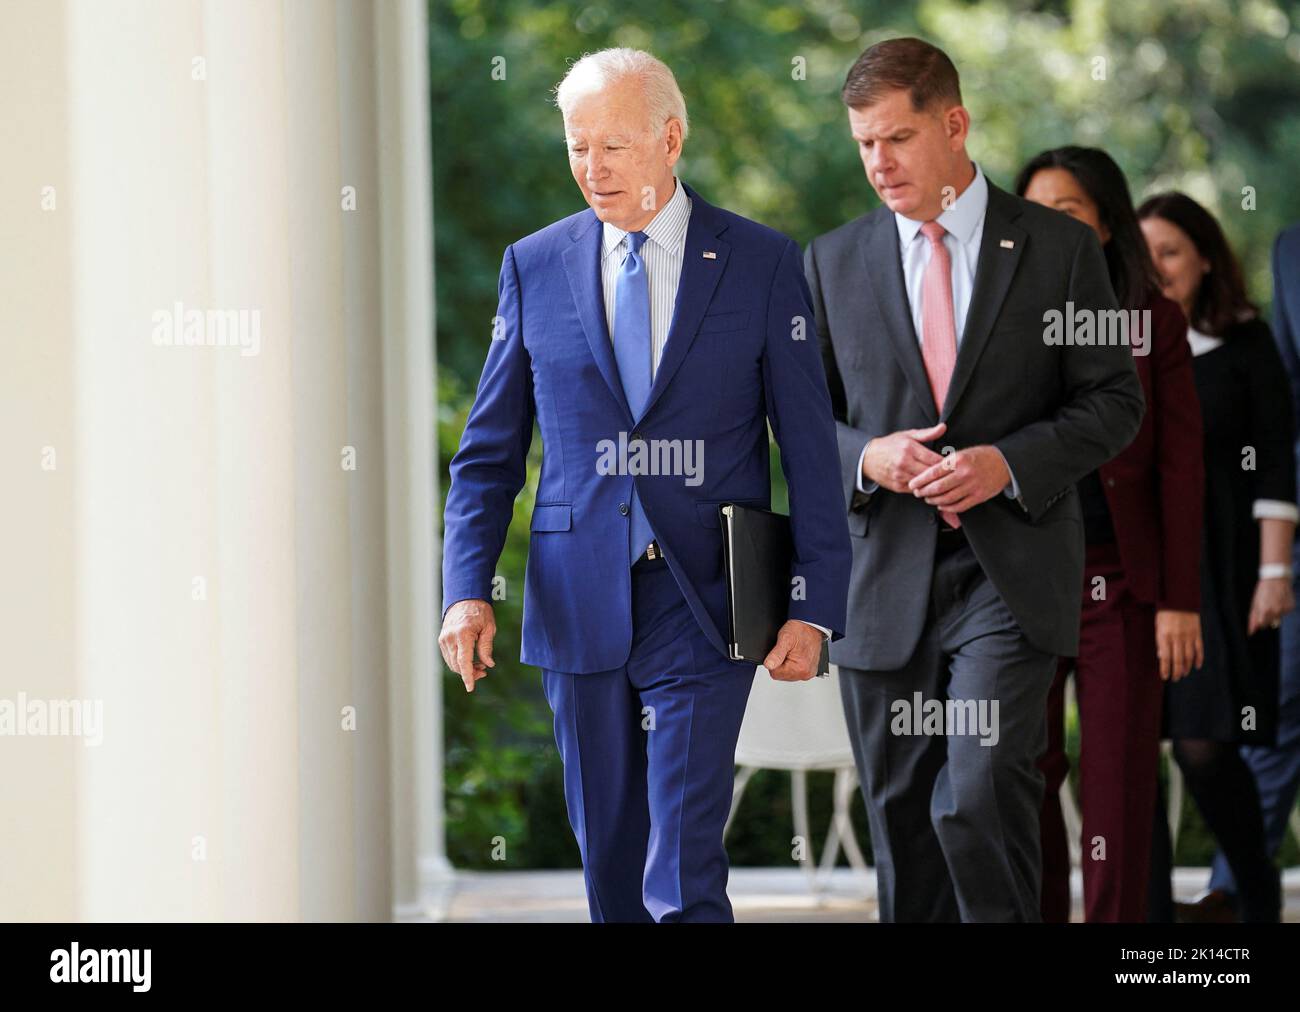 U.S. President Joe Biden walks with Labor Secretary Marty Walsh and negotiators who brokered the railway labor agreement after U.S. railroads and unions secured a tentative deal to avert a rail shutdown, as he arrives to deliver remarks on the deal in the Rose Garden at the White House in Washington, U.S., September 15, 2022. REUTERS/Kevin Lamarque Stock Photo